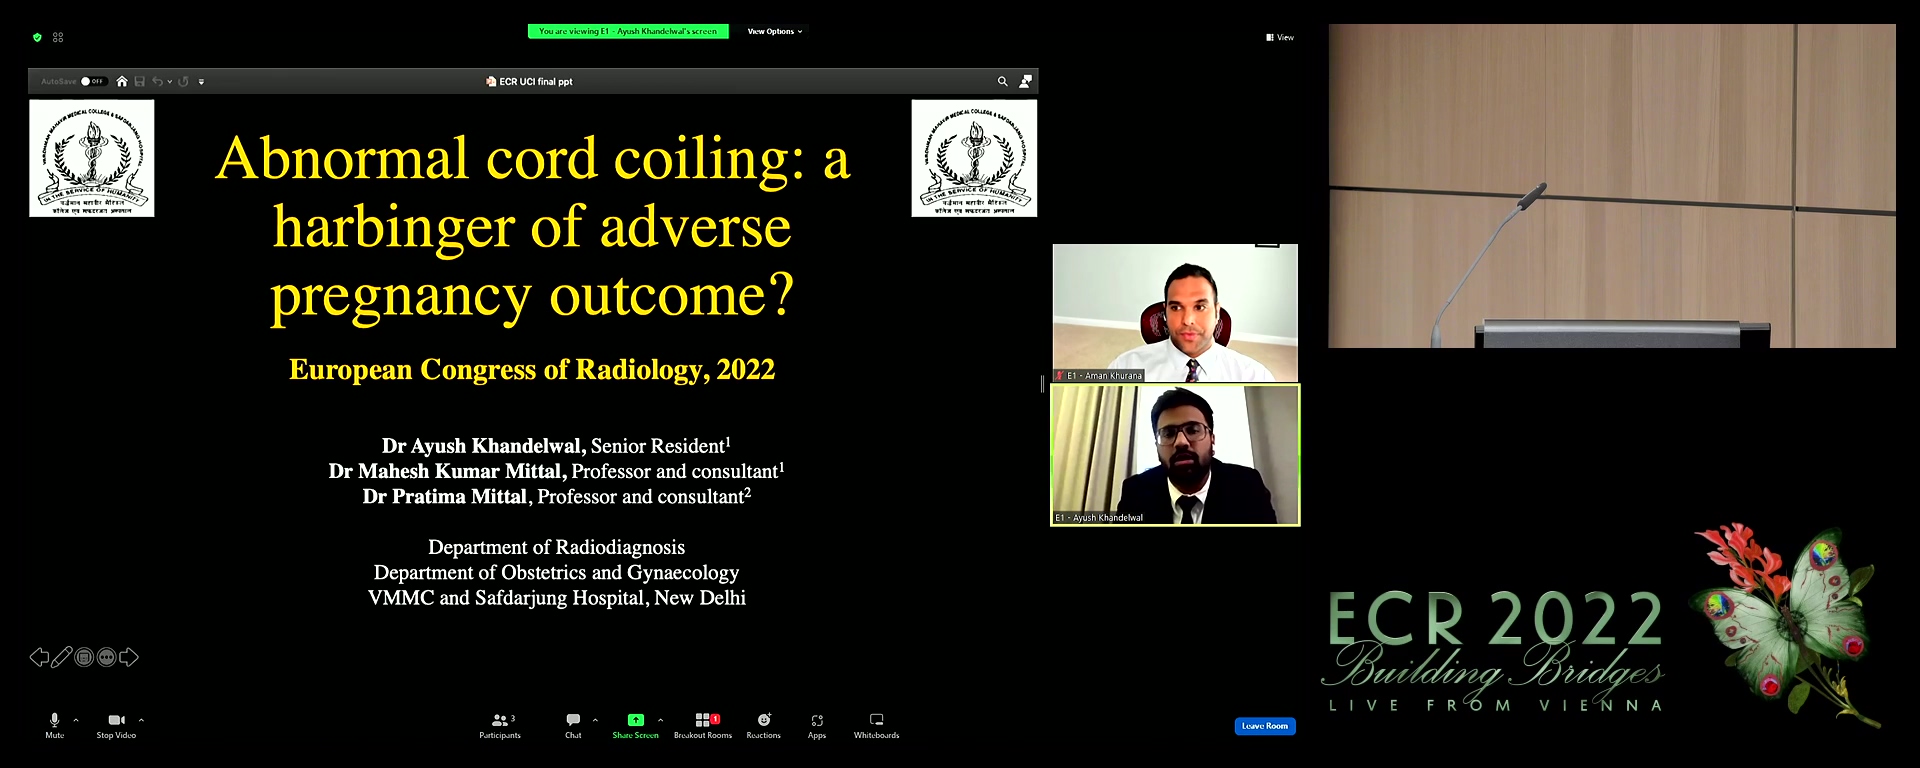 Abnormal cord coiling: a harbinger of adverse pregnancy outcome? - Ayush Khandelwal, Jaipur / IN